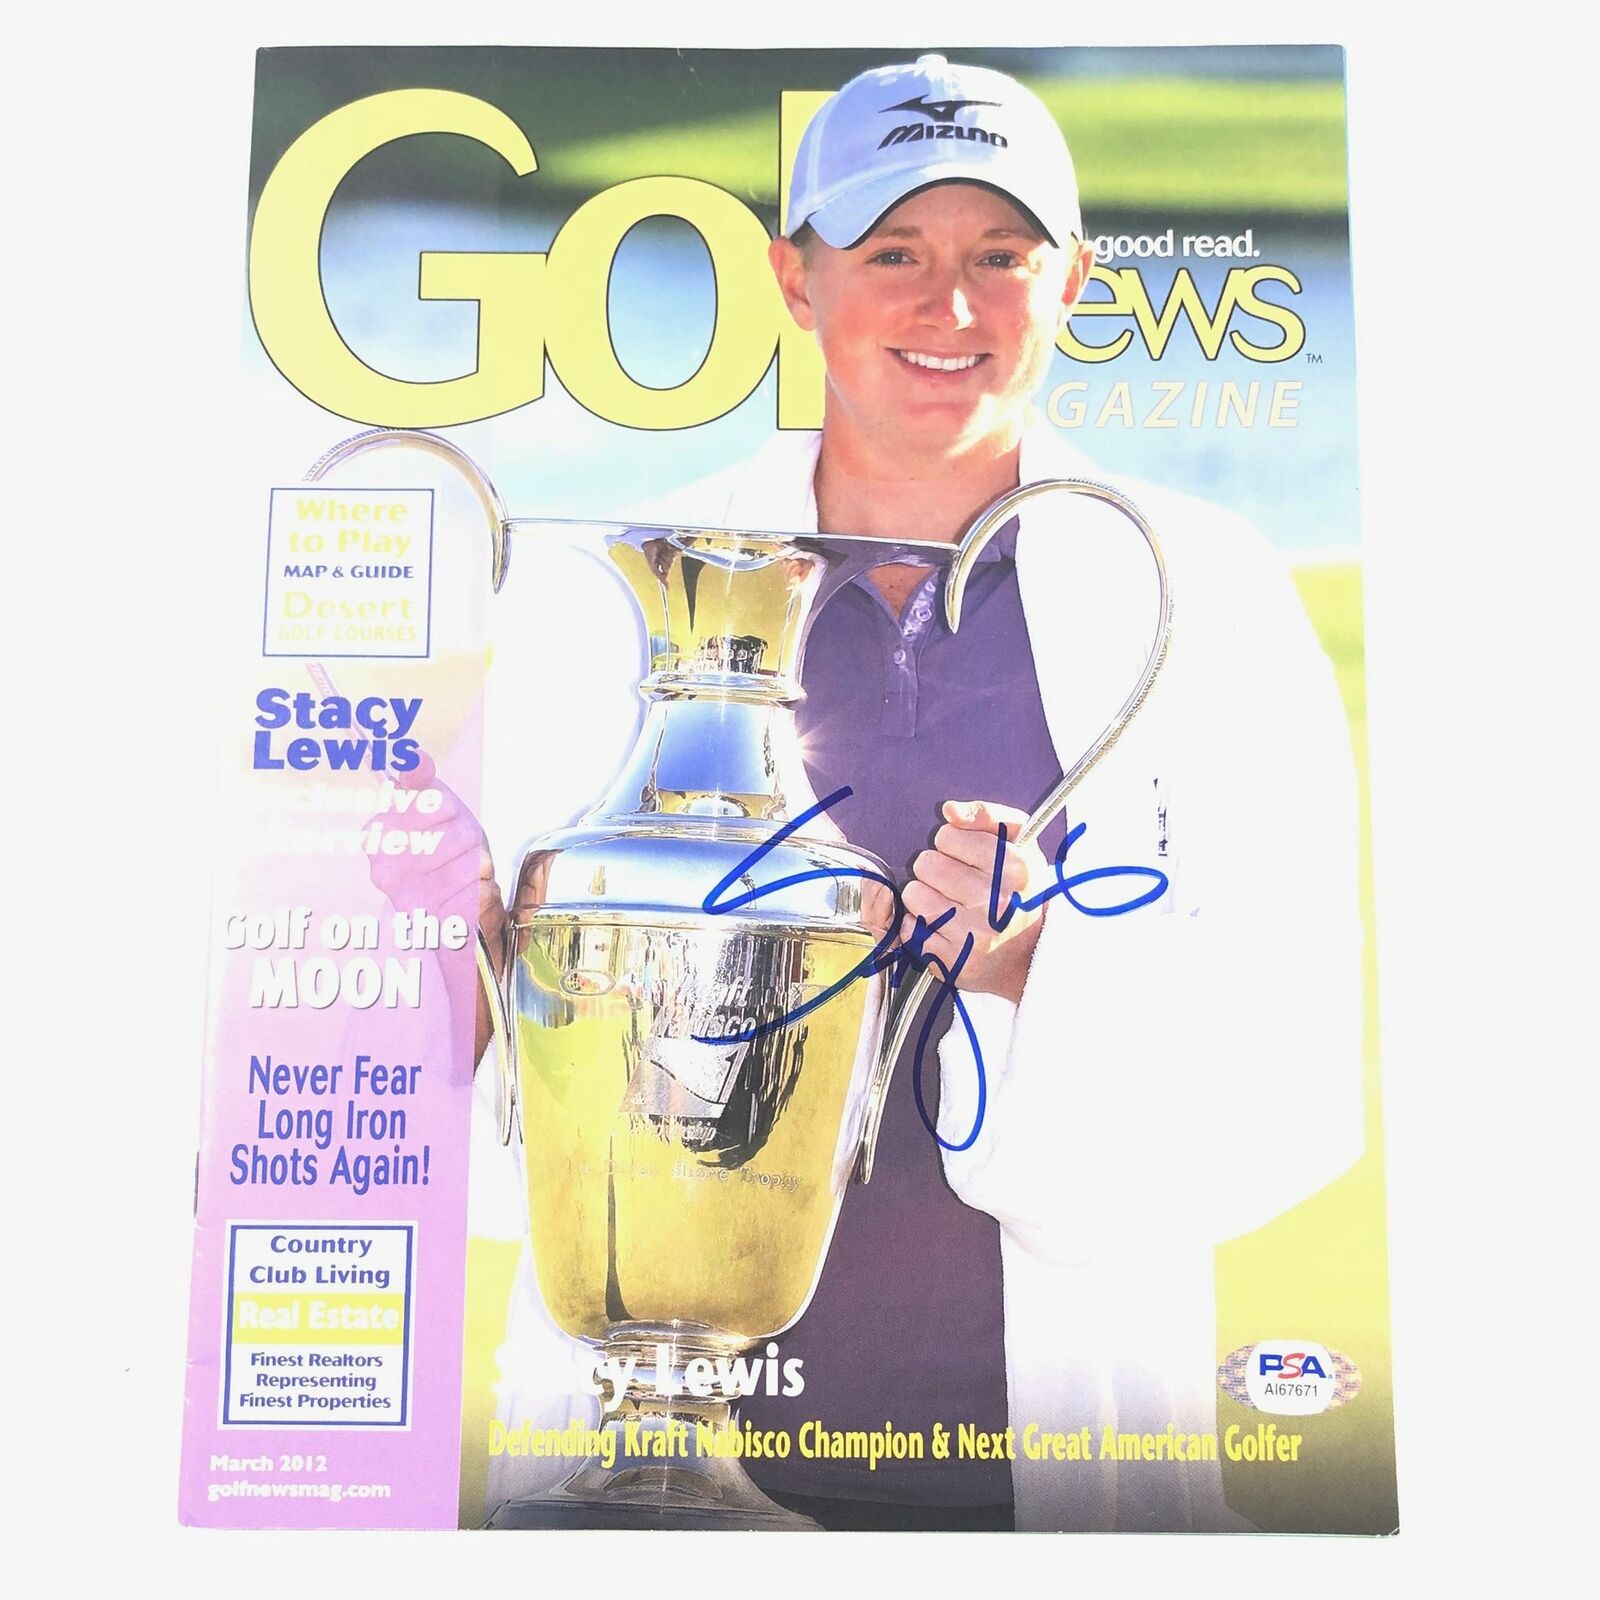 Stacy Sales for sale Lewis signed Golf Directly managed store DNA PSA Magazine Autographed